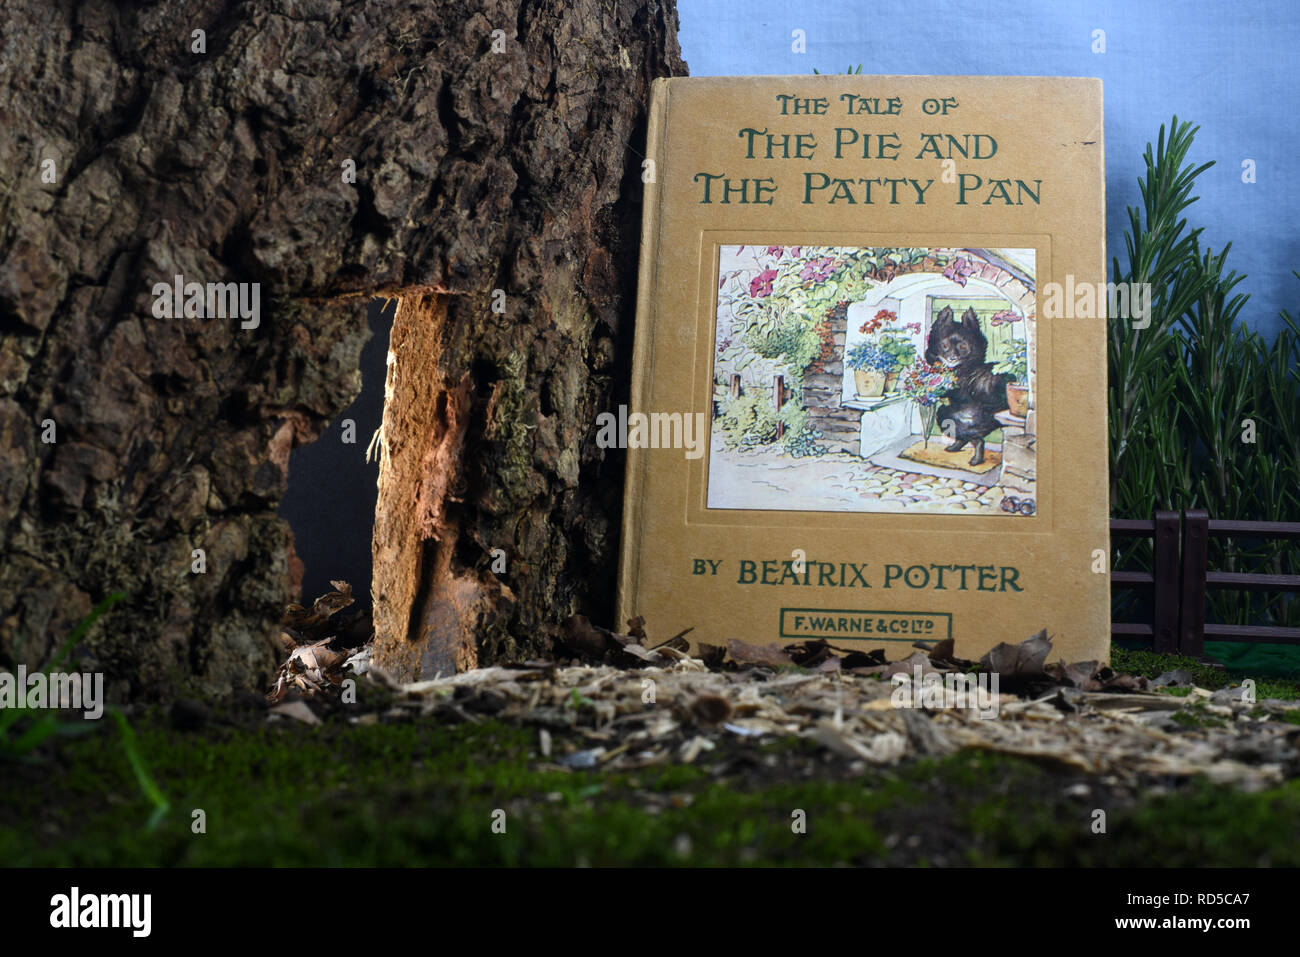 Vintage Beatrix Potter book of the Tale of the Pie and the Patty Pan. Still Life Stock Photo